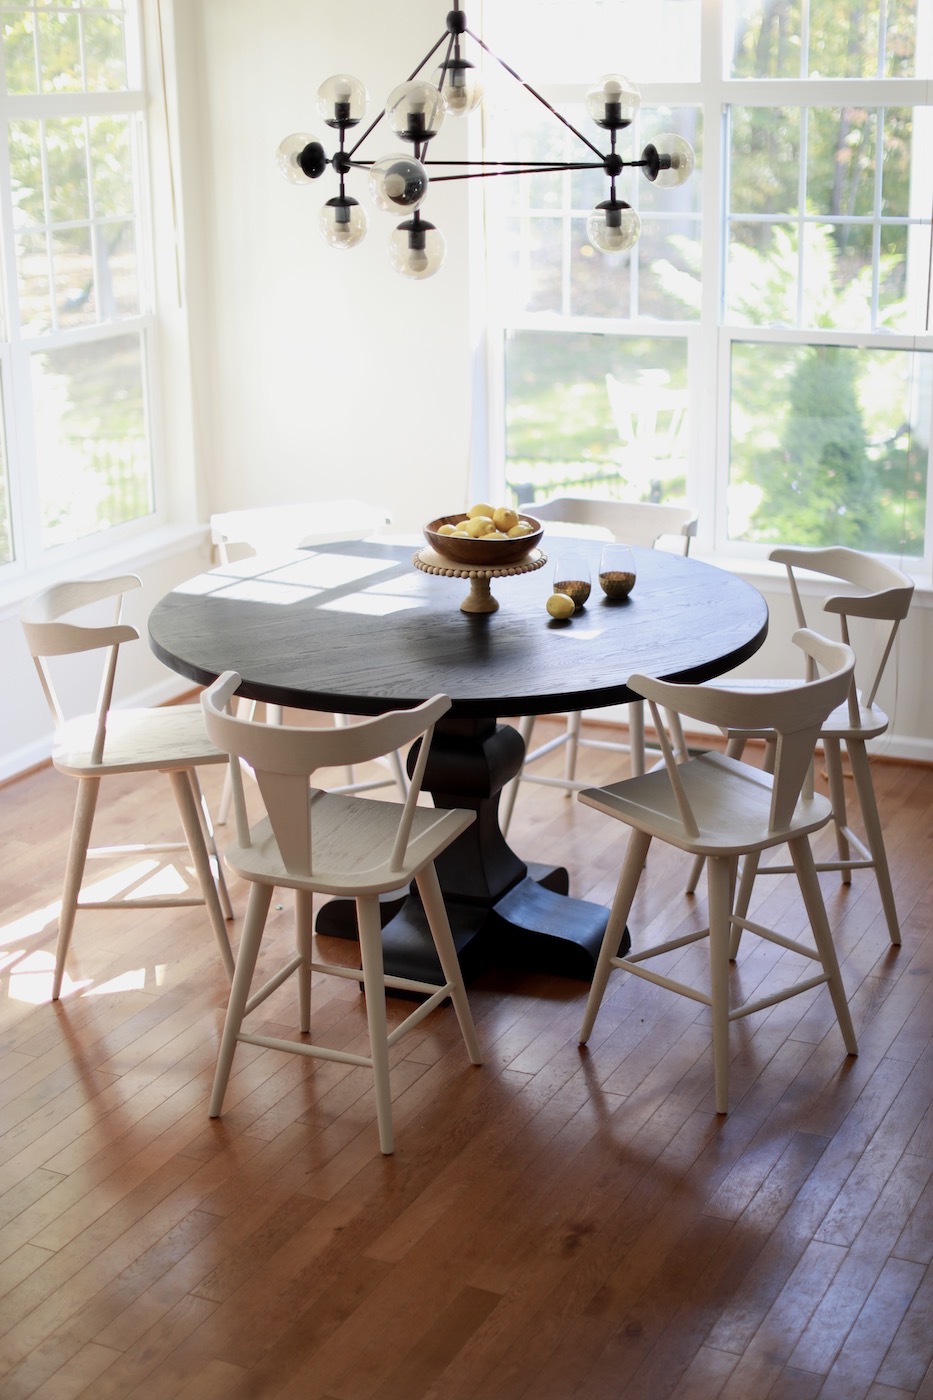 round-dining-table-natural-wood-chairs